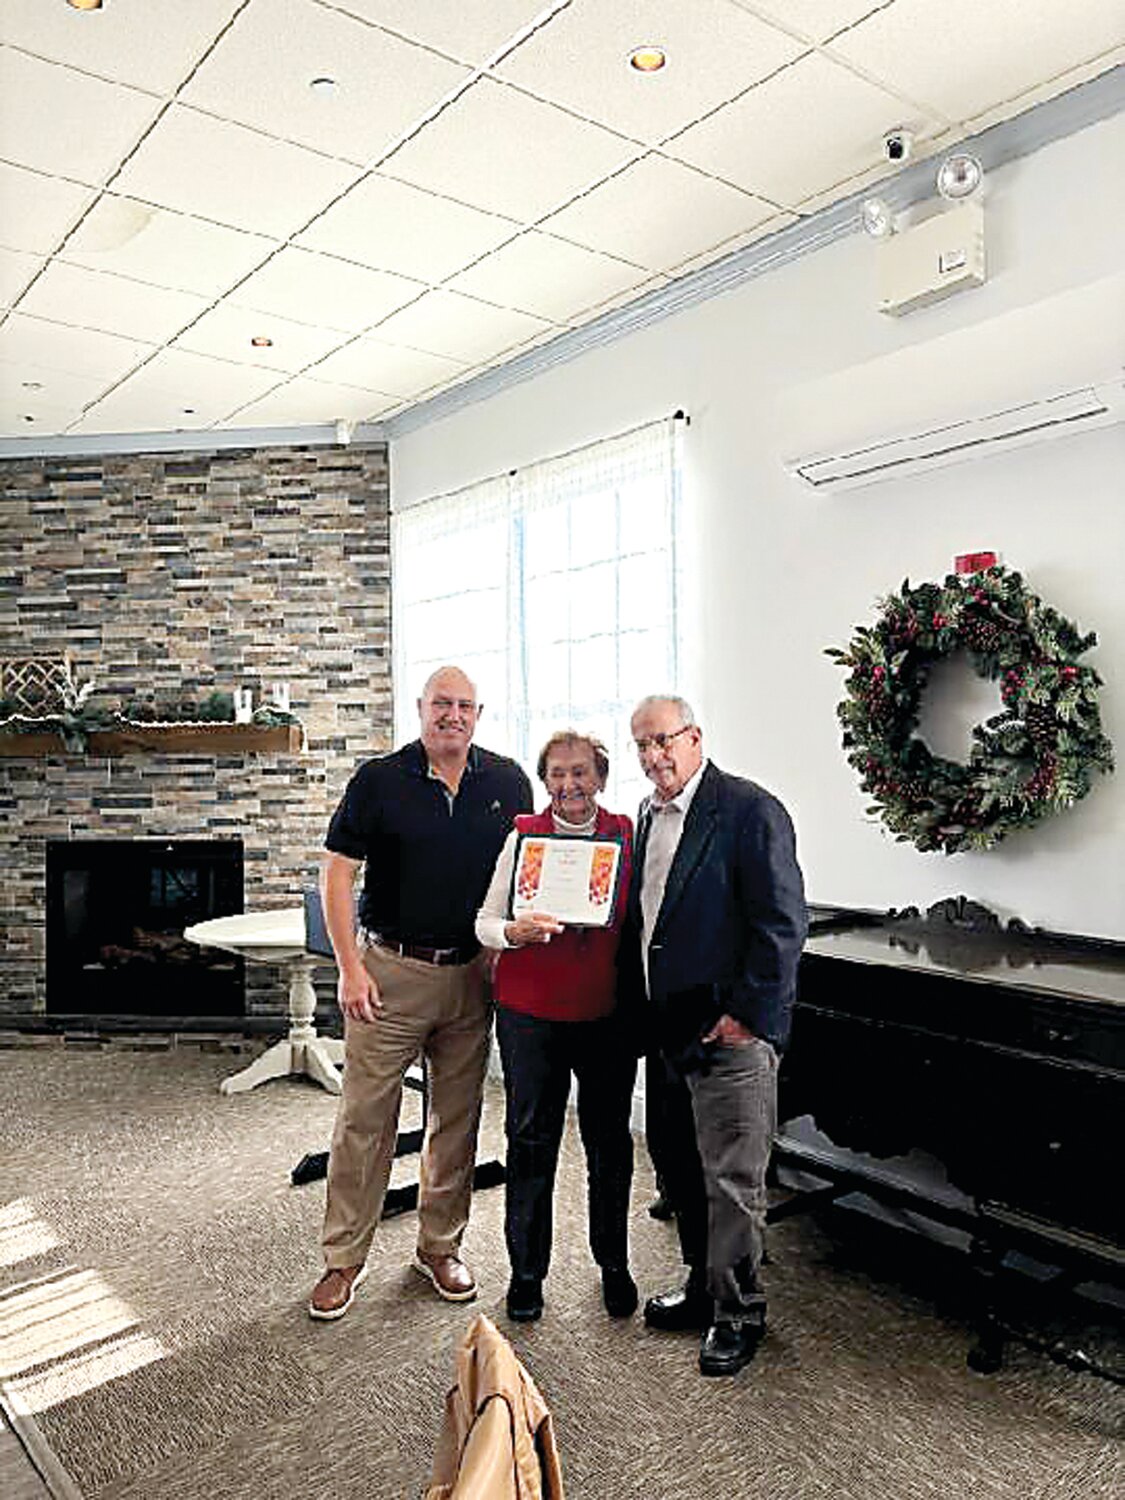 Jason Cartwright, left, representing Warminster Rotary Club, presents Evie Dugan, the longest running volunteer at Warminster Food Bank, with a Certificate of Merit in honor of her 45 years of service to Warminster Food Bank. With them is Mike Cerino, executive director, Warminster Food Bank.